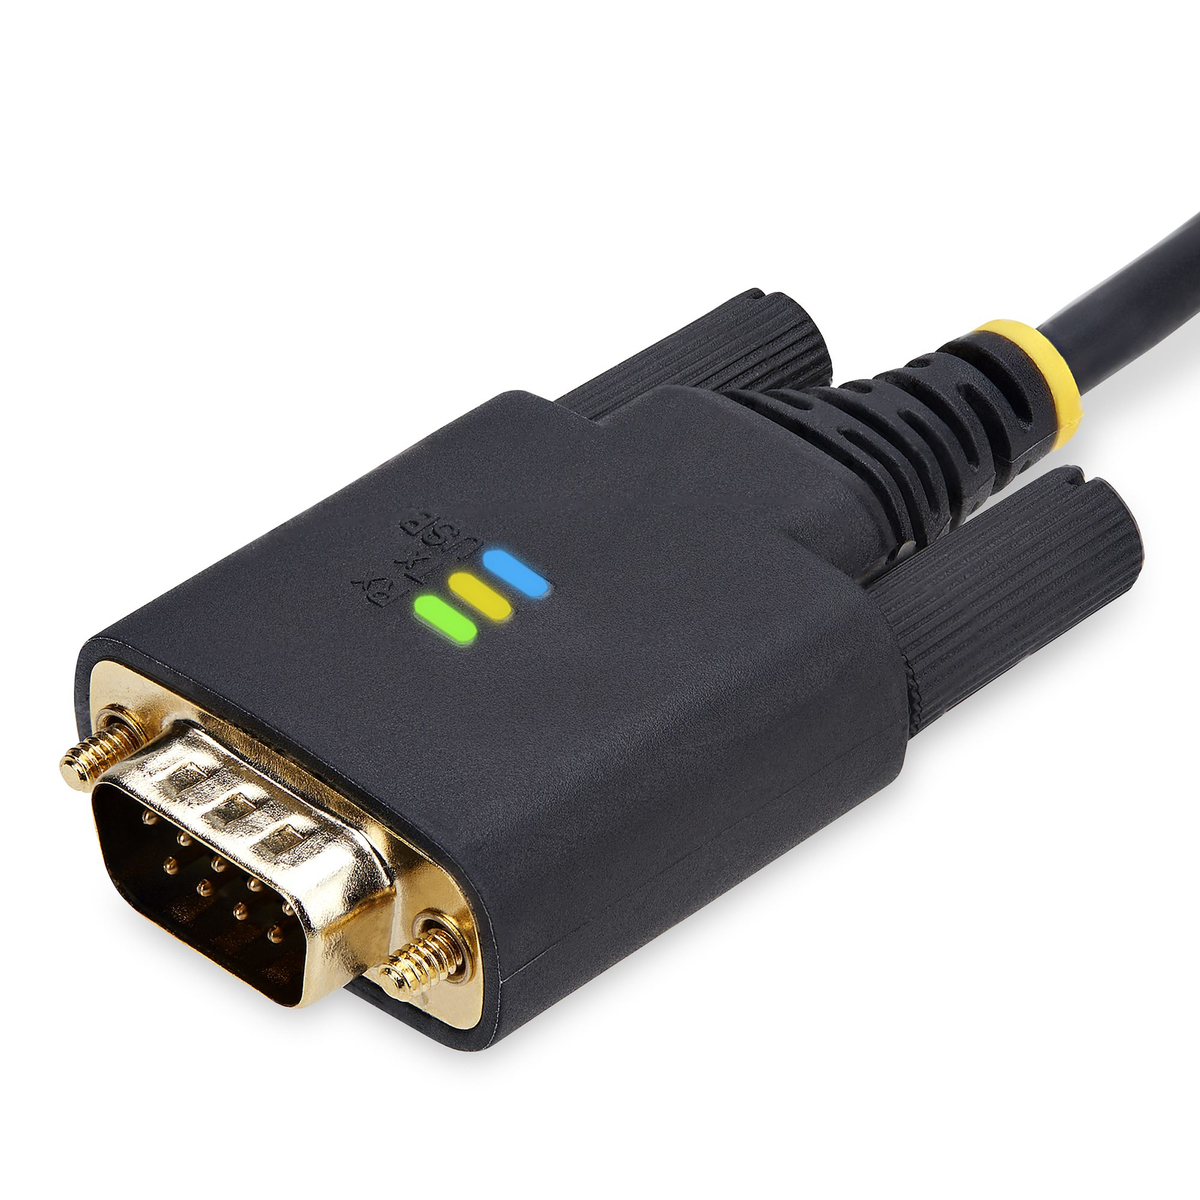 10ft/3m USB to RS232 Serial Adapter